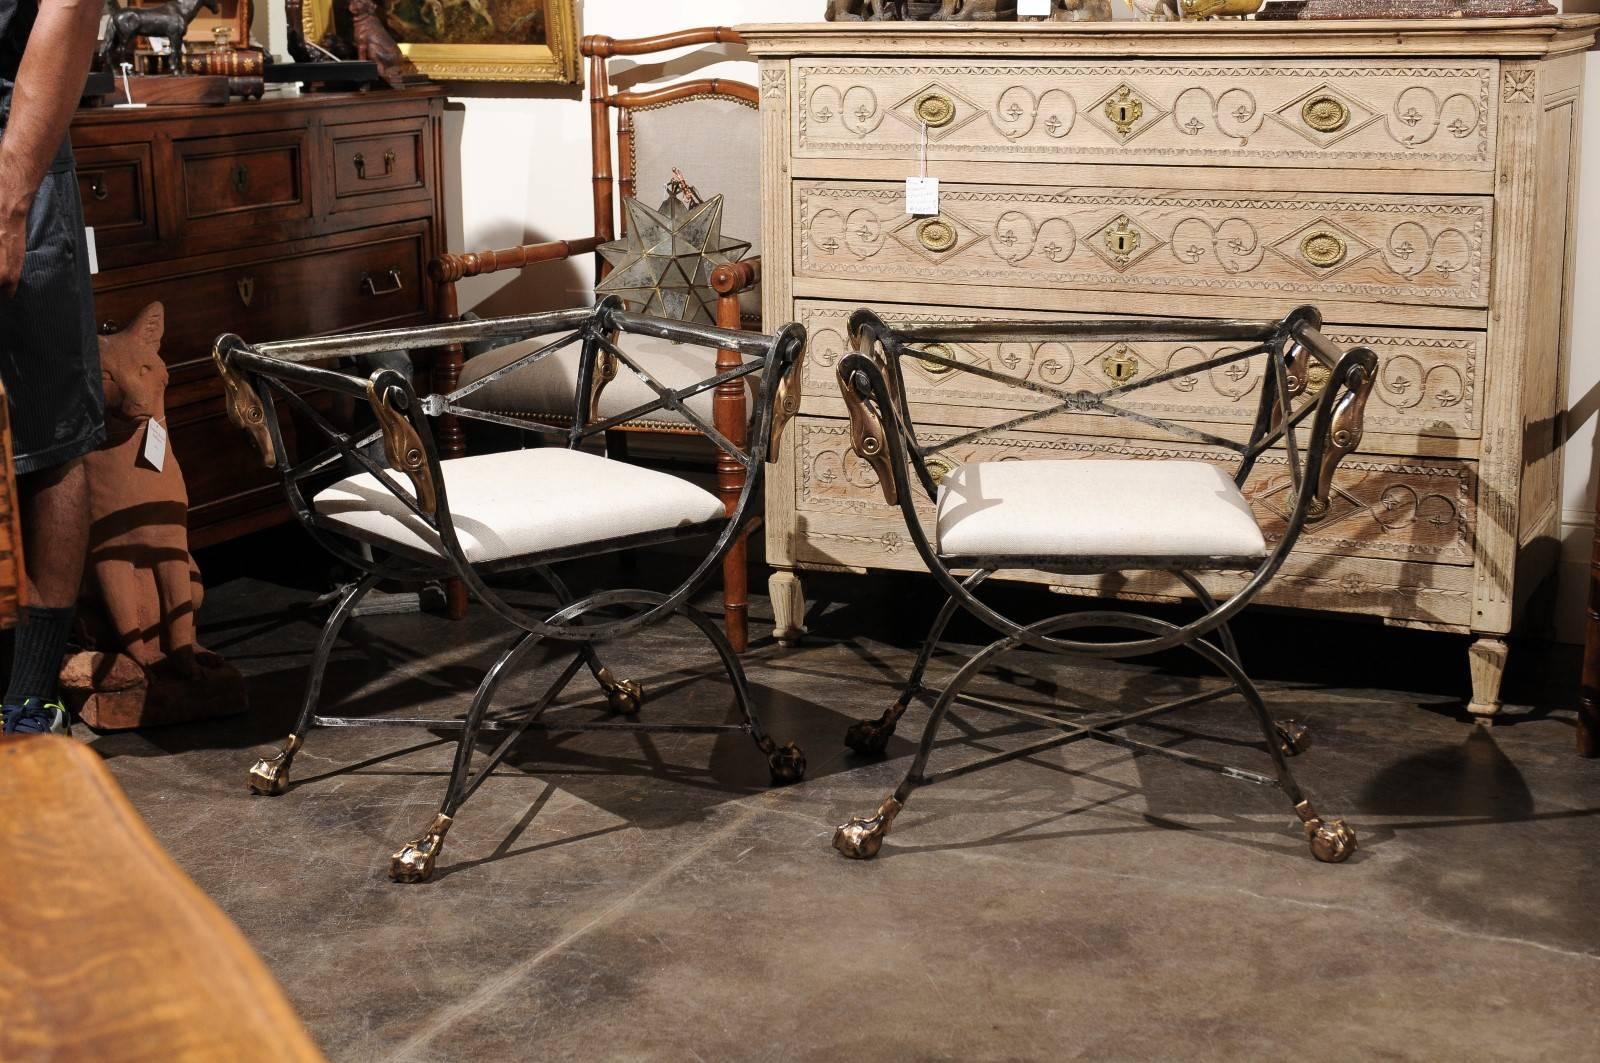 A pair of English period Regency steel and brass curule armchairs with swan motifs from the early 19th century. This pair of curule Regency chairs circa 1820 features an X-shape steel frame with four swans decorating the arms in a graceful downward